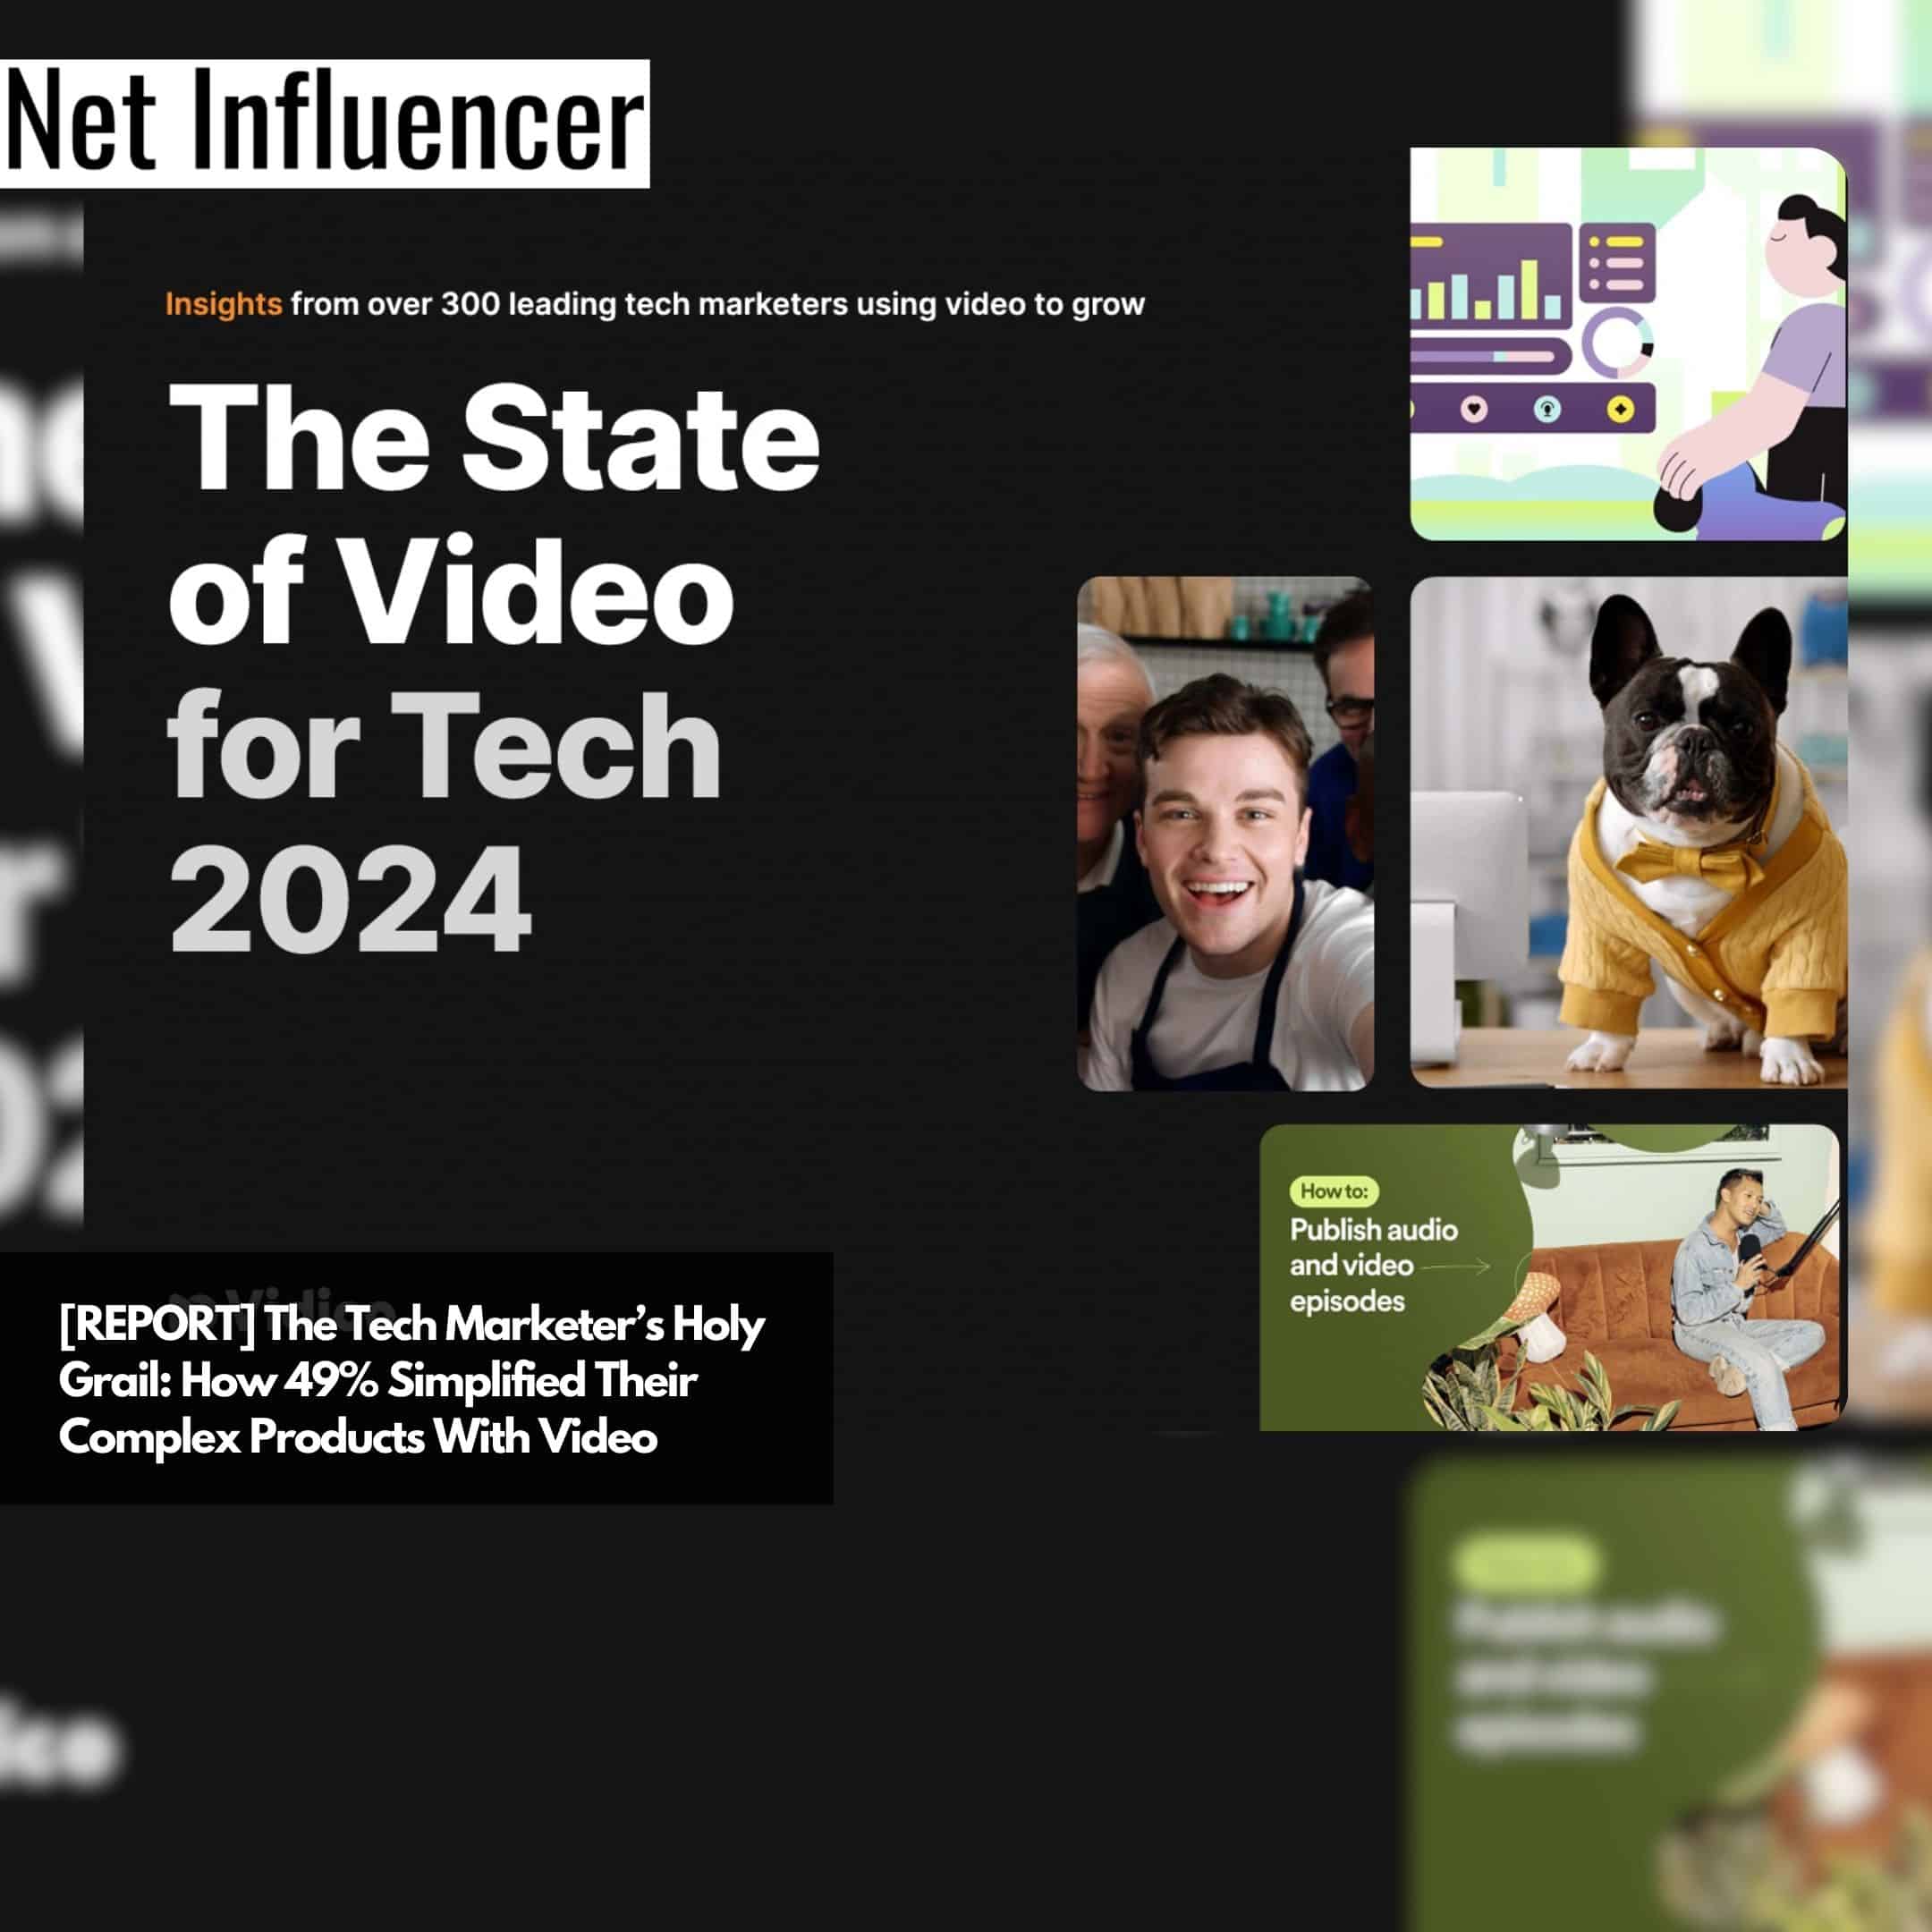 [REPORT] The Tech Marketer’s Holy Grail How 49% Simplified Their Complex Products With Video (1)